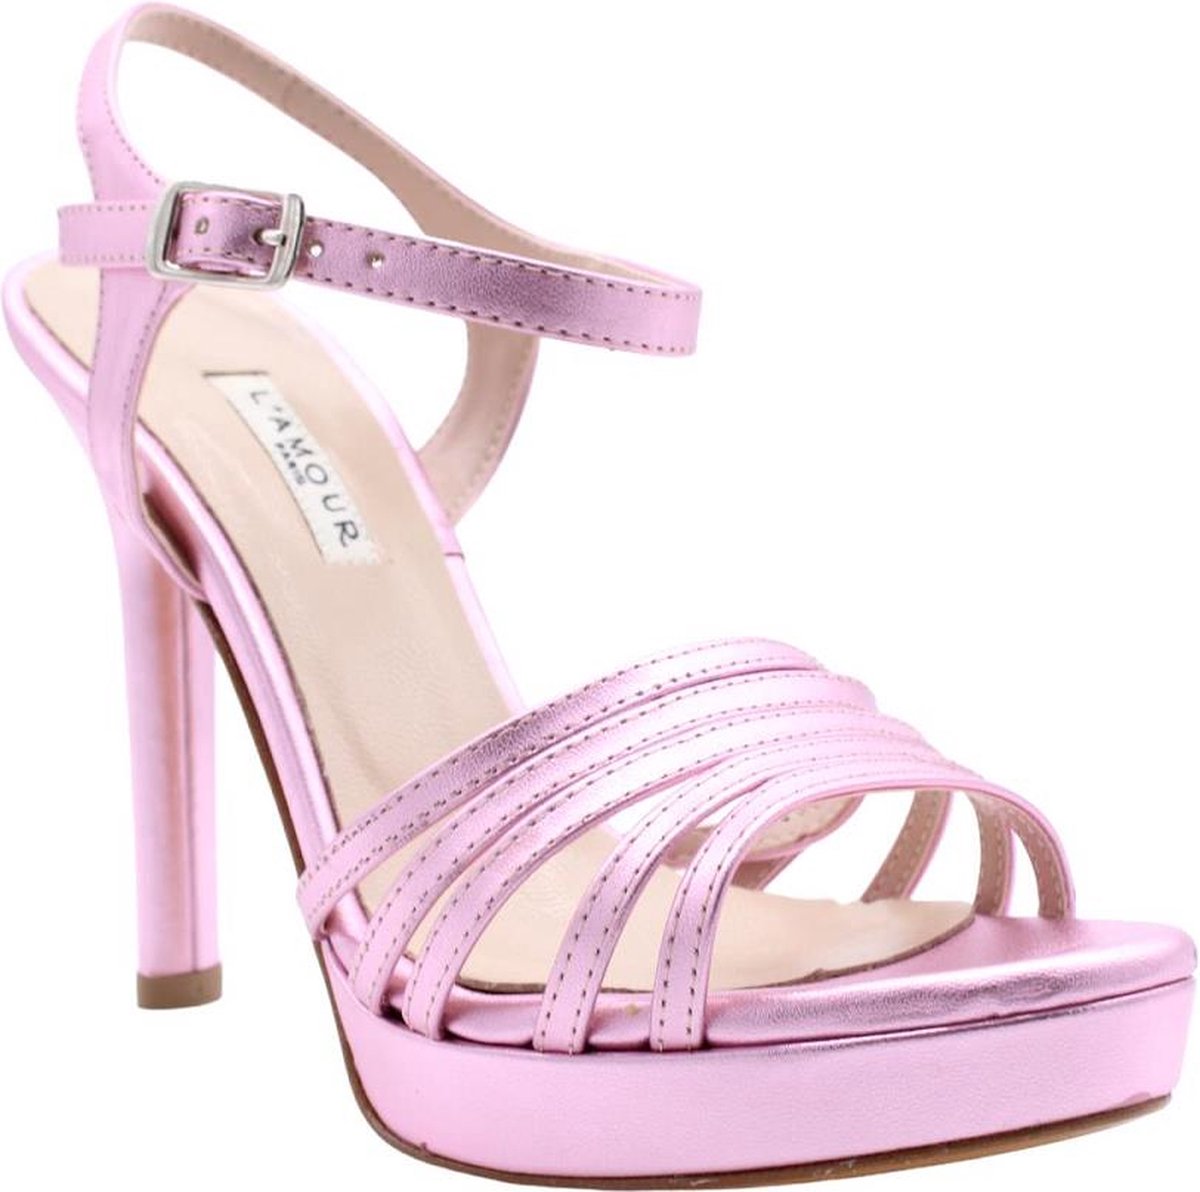 L'amour Sandaal Pink 37